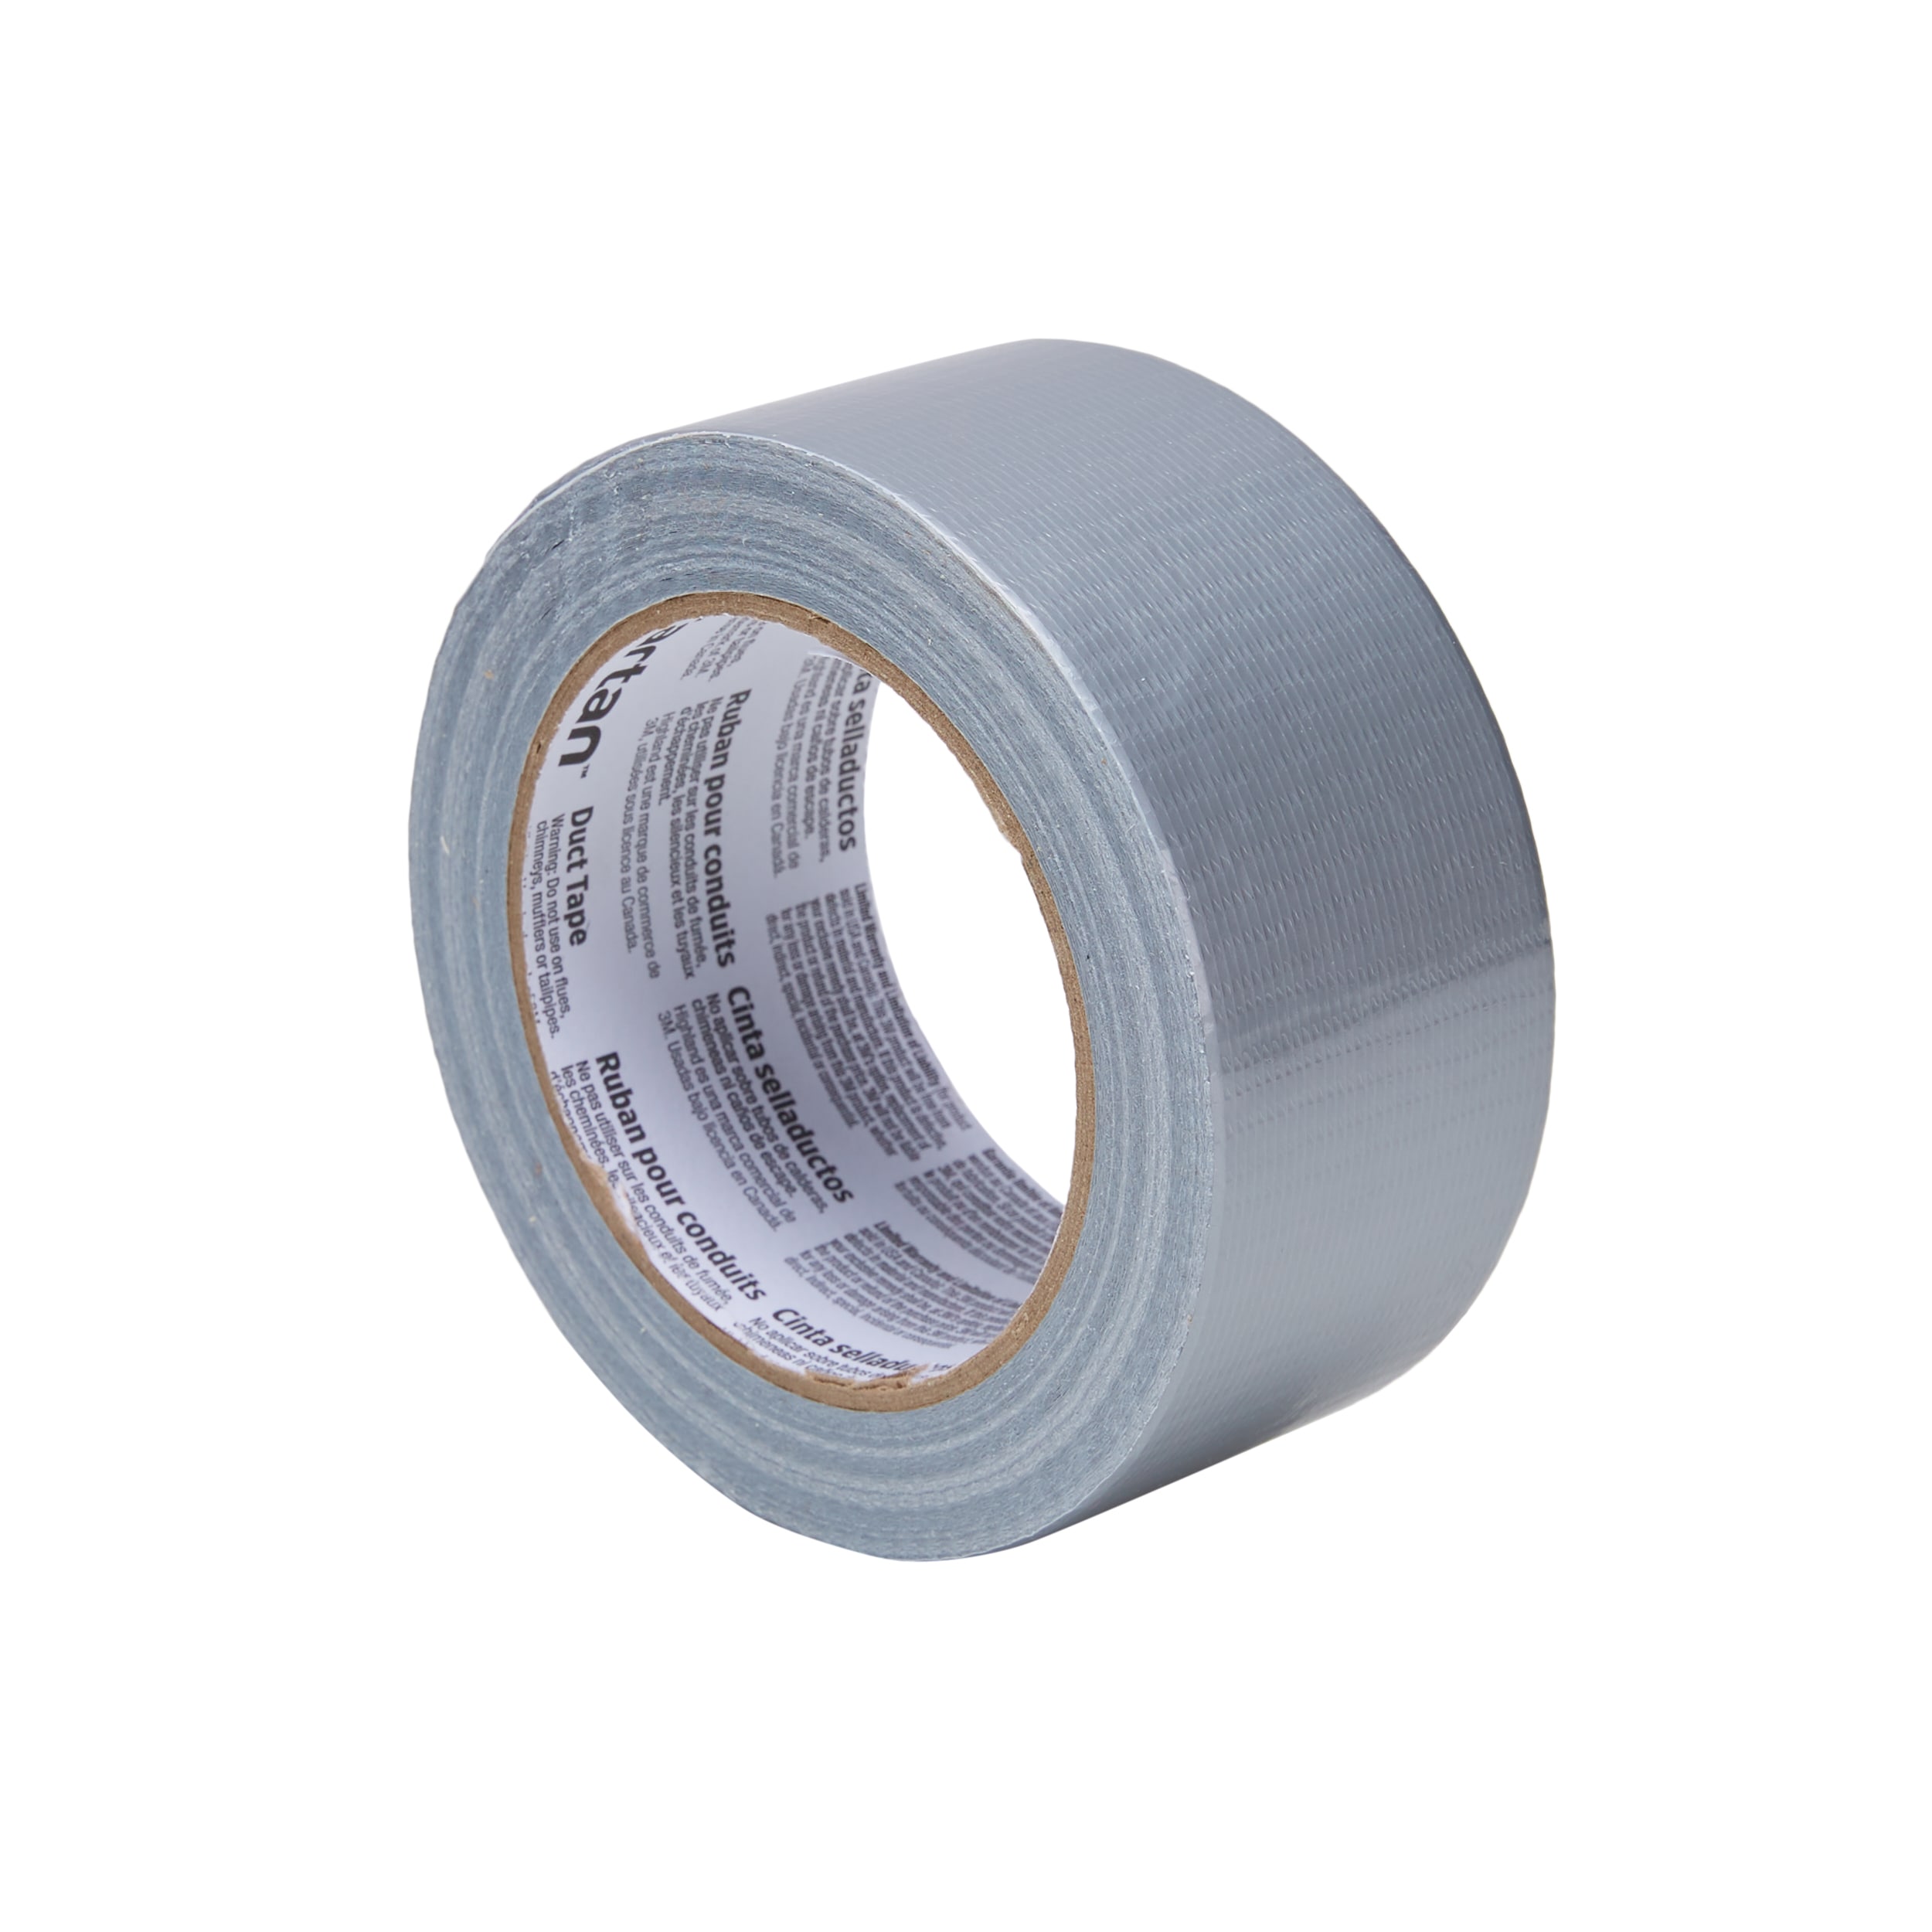 WOD DTC12 Contractor Grade Silver (Gray) Duct Tape 12 Mil, 3/4 inch x 60  yds. Waterproof, UV Resistant for Crafts & Home Improvement